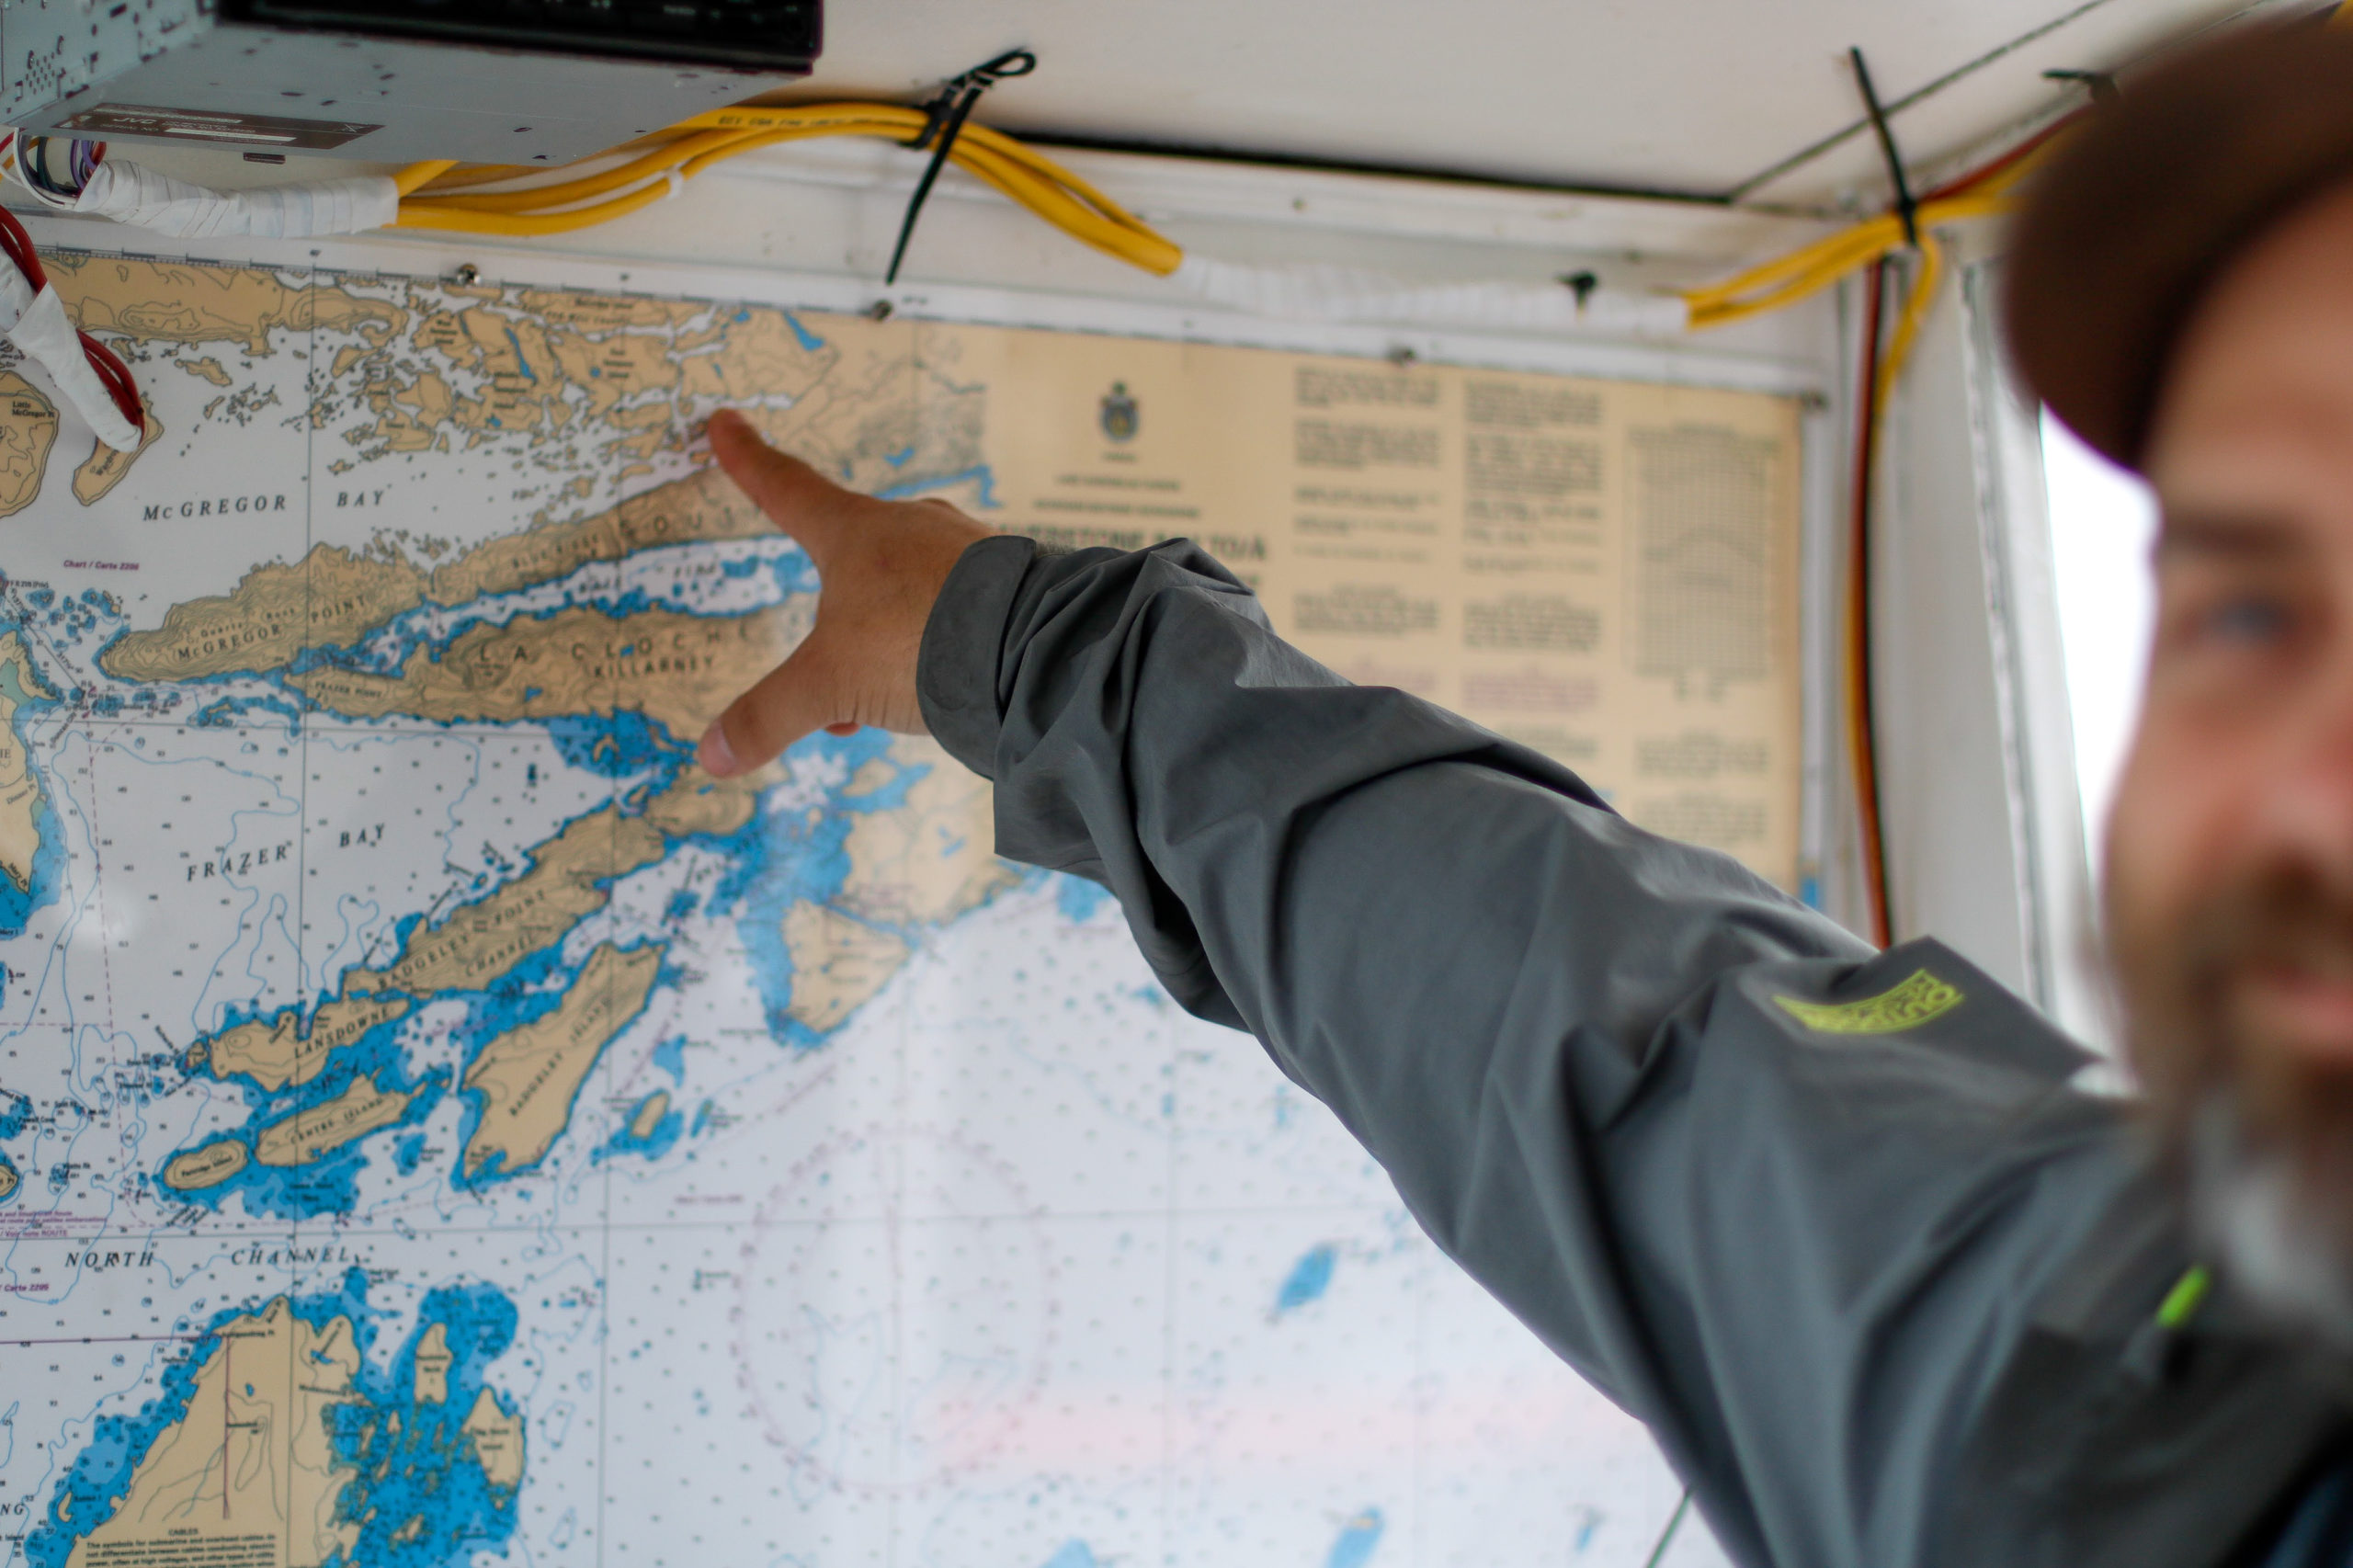 Preston points to a map of Killarney within a water taxi from Killarney Outfitters